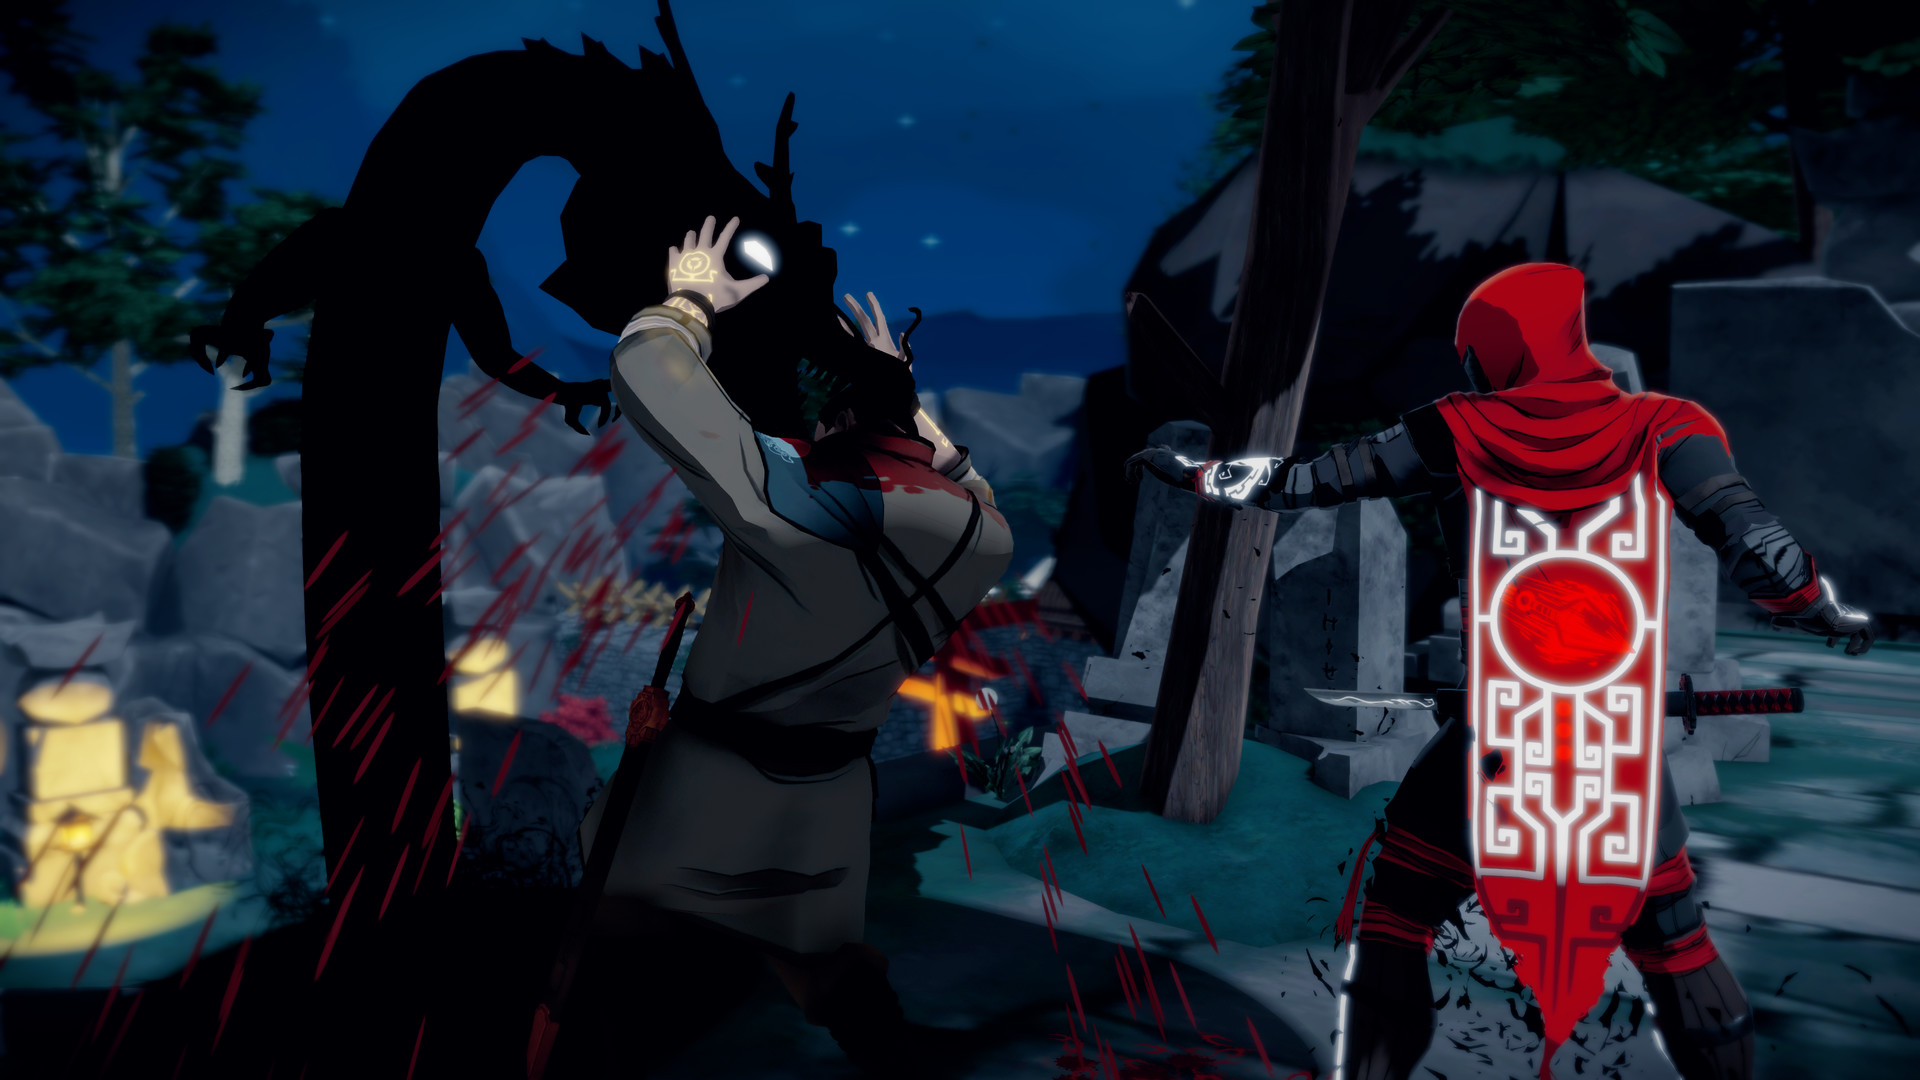 Aragami receives new expansion this year